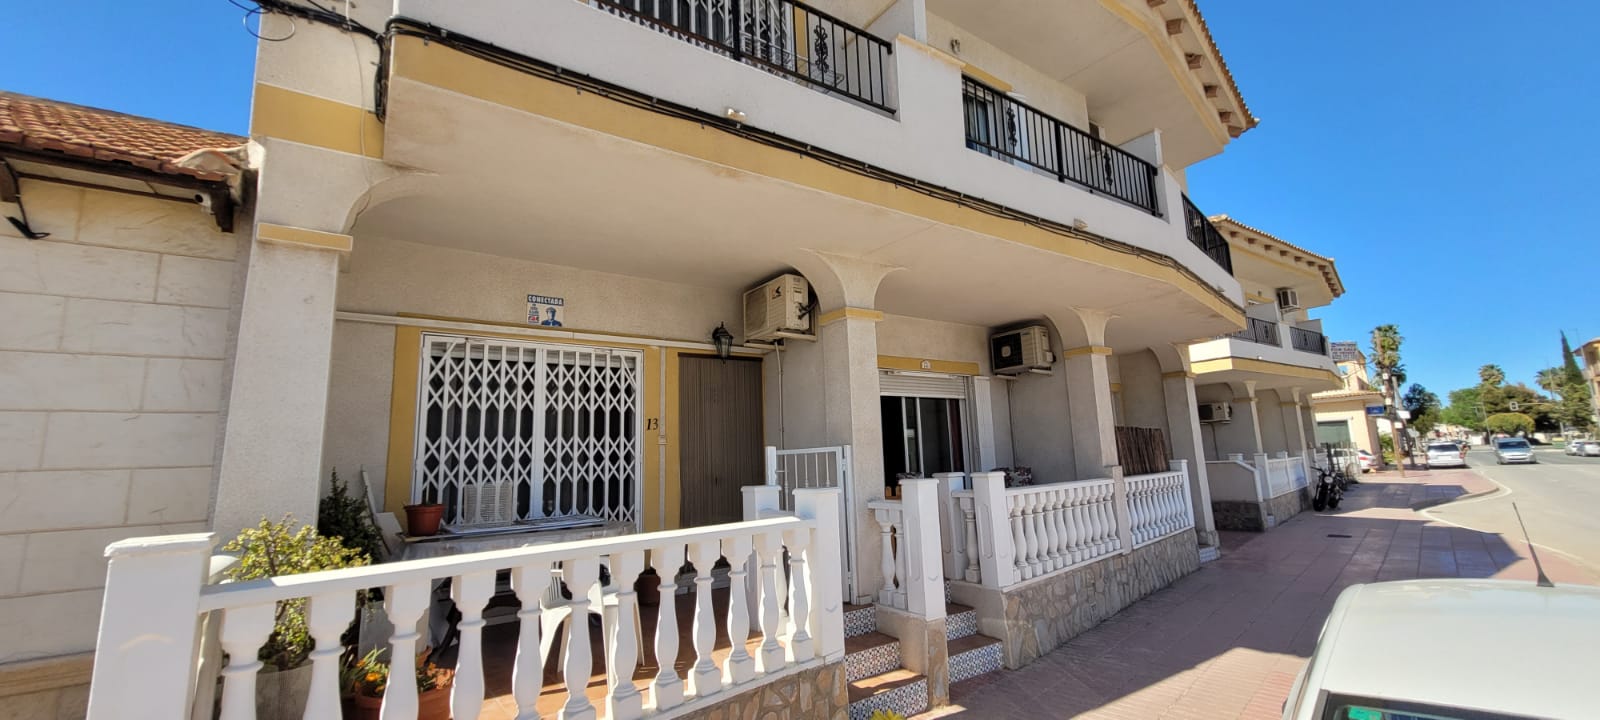 For sale: 2 bedroom house / villa in Catral